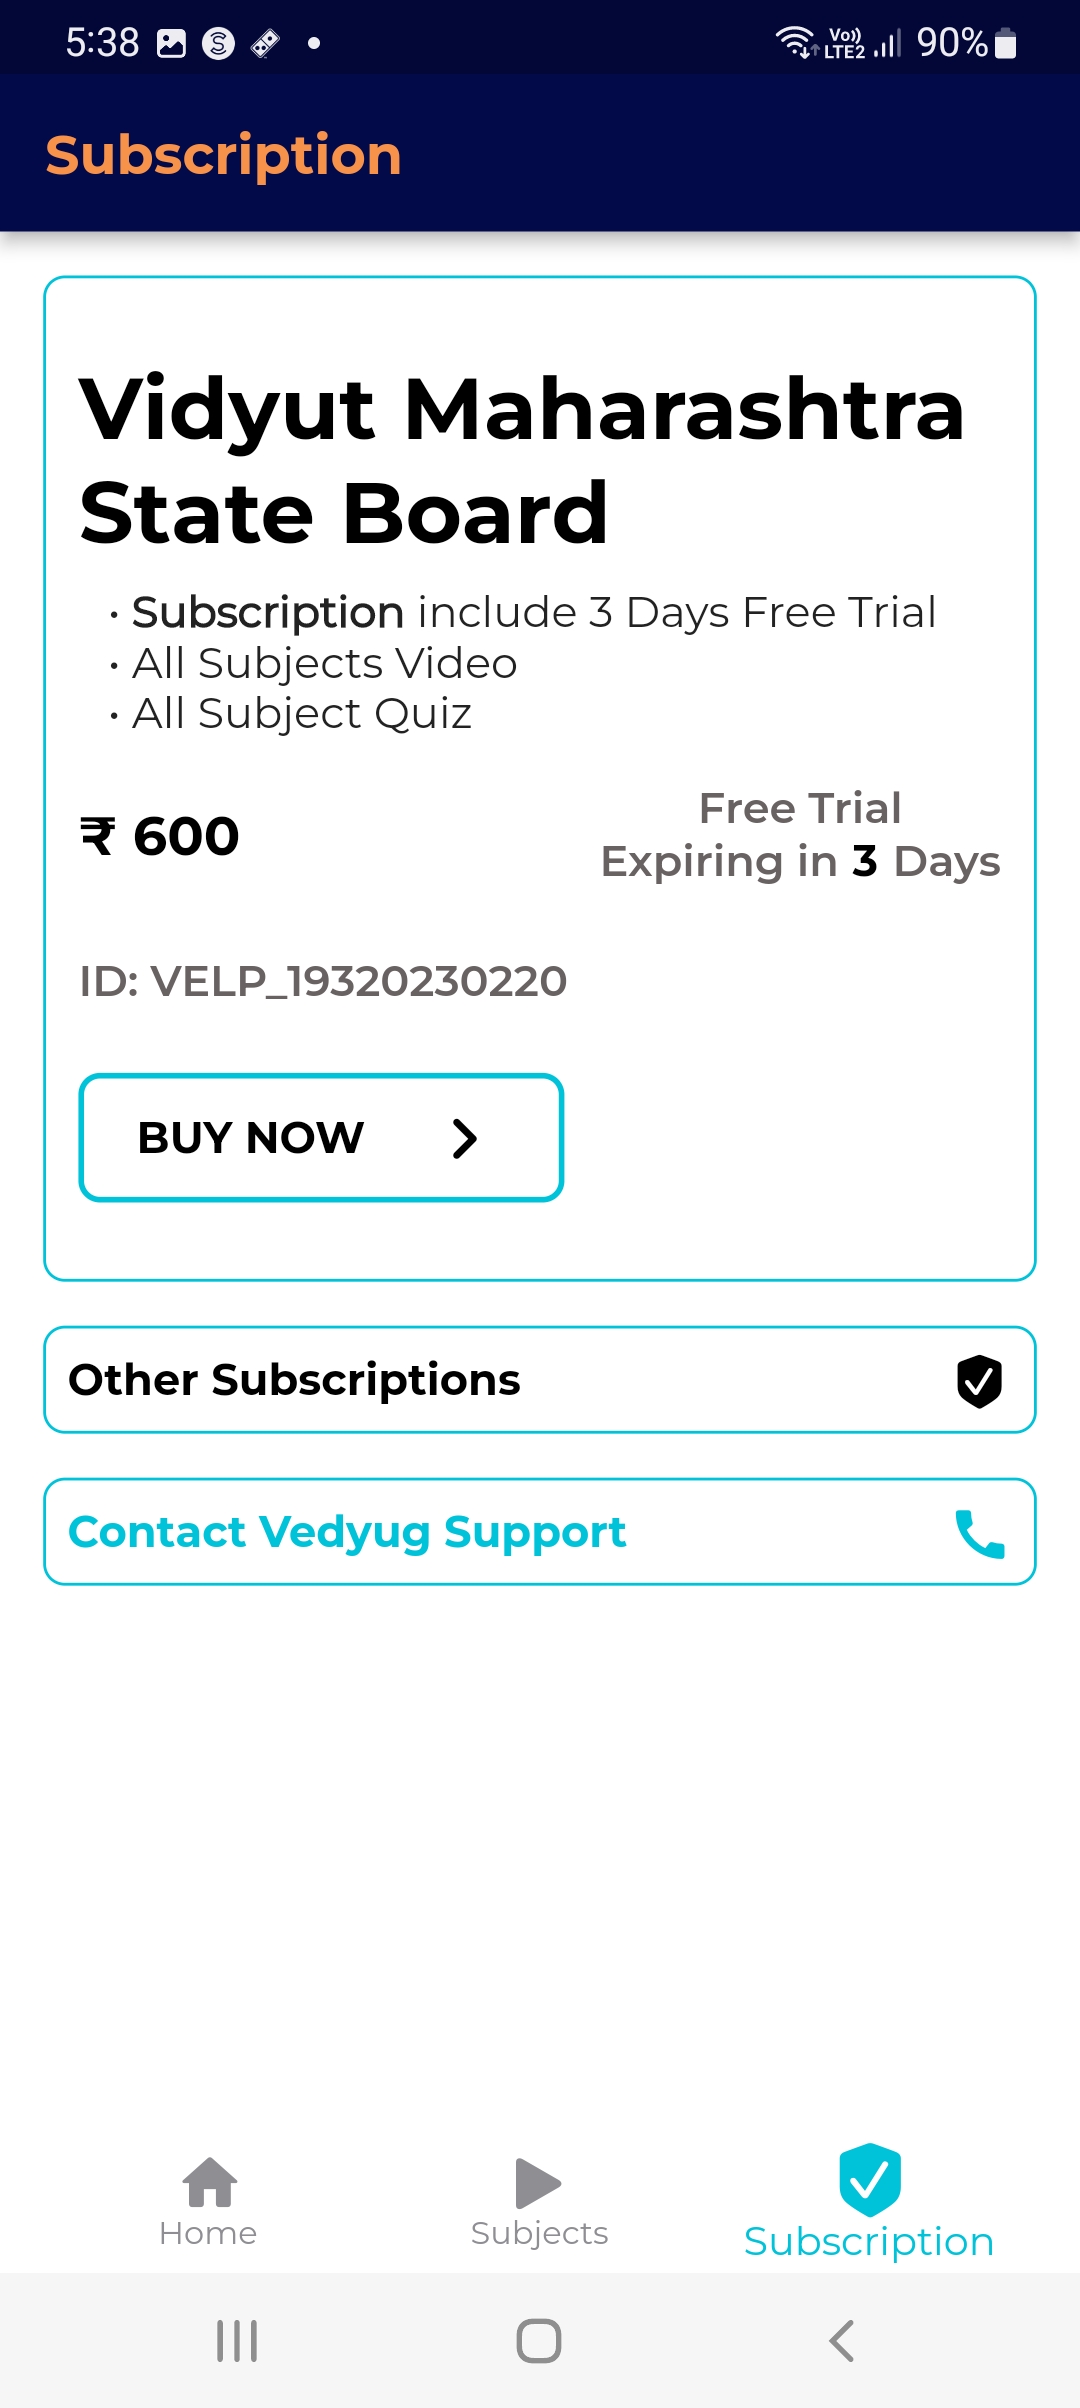 SRNL S IC ARIE |

Subscription

 

Vidyut Maharashtra
State Board

- Subscription include 3 Days Free Trial
- All Subjects Video
- All Subject Quiz

Free Trial
3 600 Expiring in 3 Days
ID: VELP_19320230220

BUY NOW >

Other Subscriptions 9